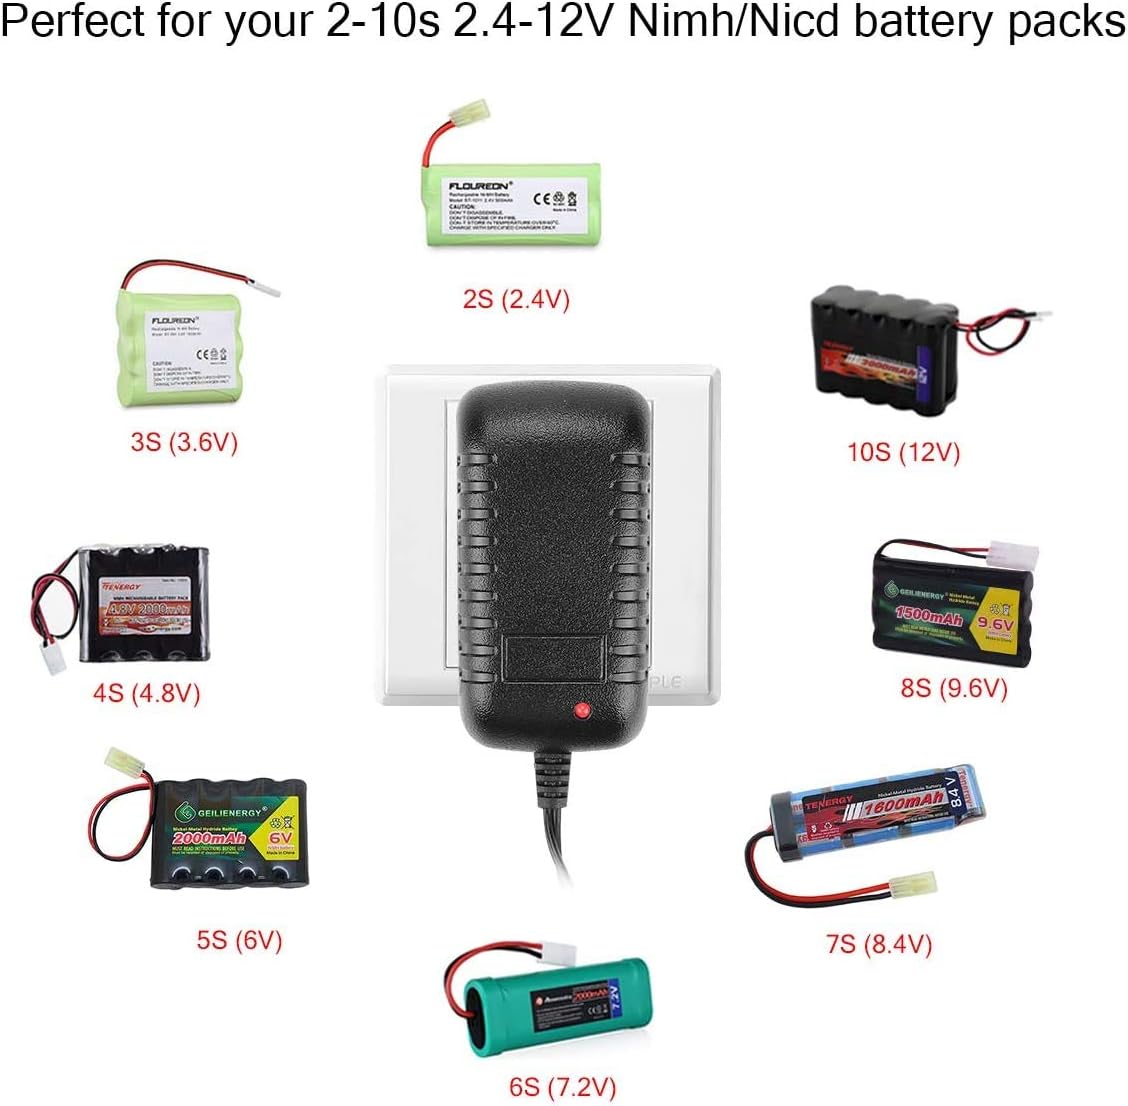 HTRC NiMH & NiCd Battery Charger Universal RC Battery Charger (2-10S)